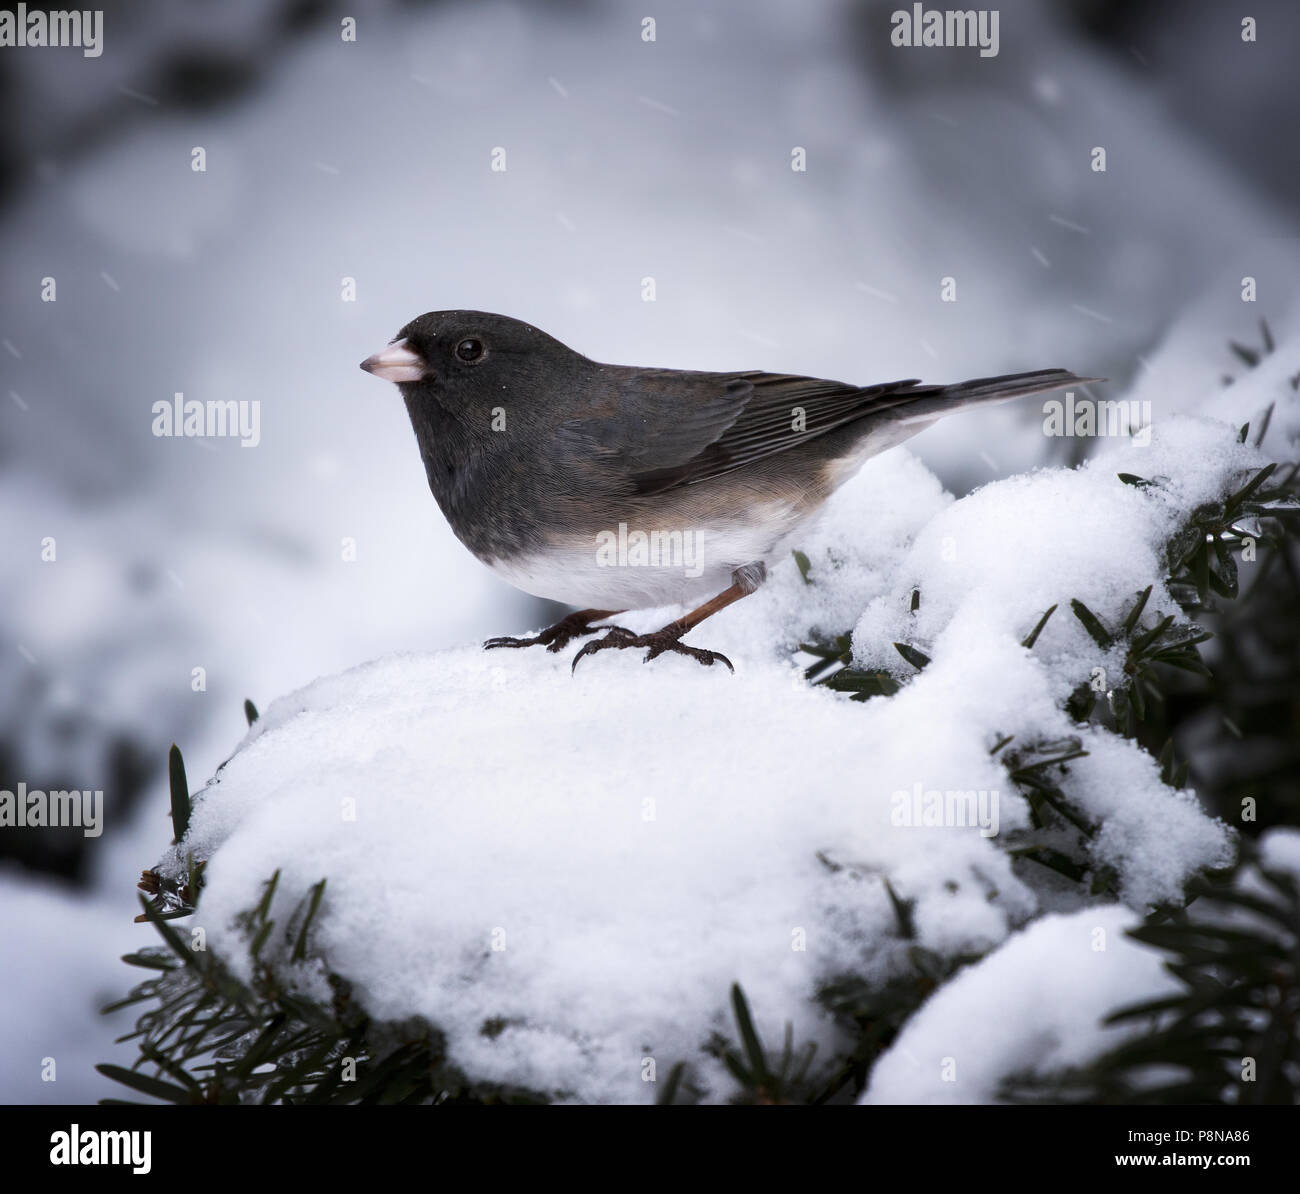 A dark-eyed junco perched in the snowy evergreen shrub during a midwestern winter storm. Stock Photo